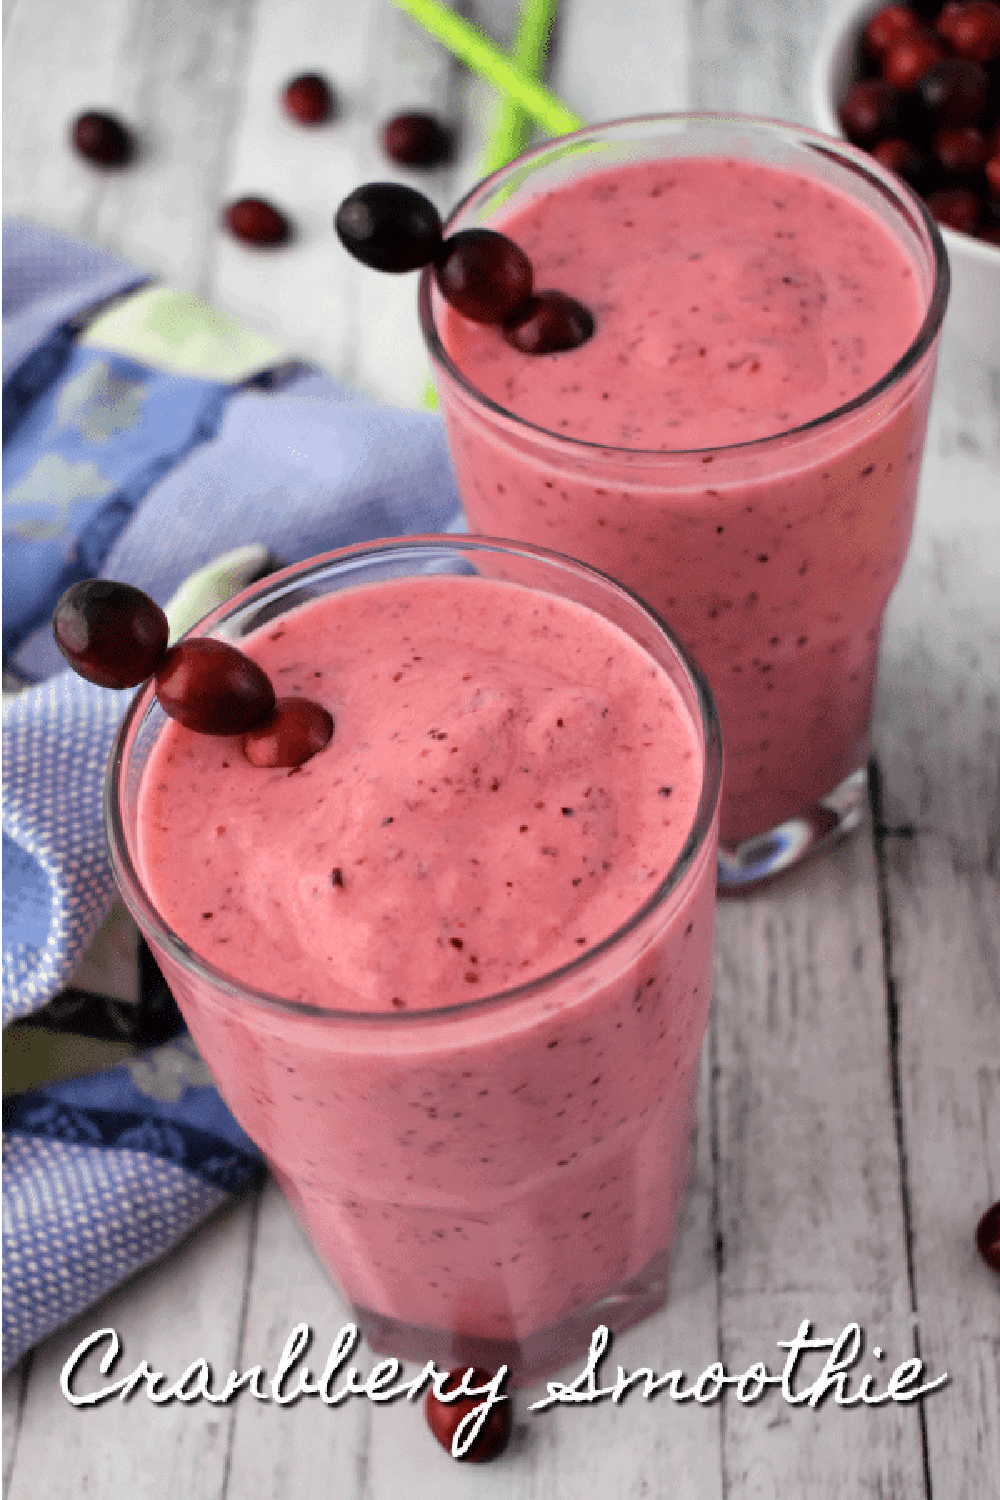 Try a Pineapple Cranberry Smoothie for an irresistible flavor combination that's unexpectedly perfect at any time of year. With this sweet and tart fruit smoothie is packed with vitamins and minerals! via @jugglingactmama